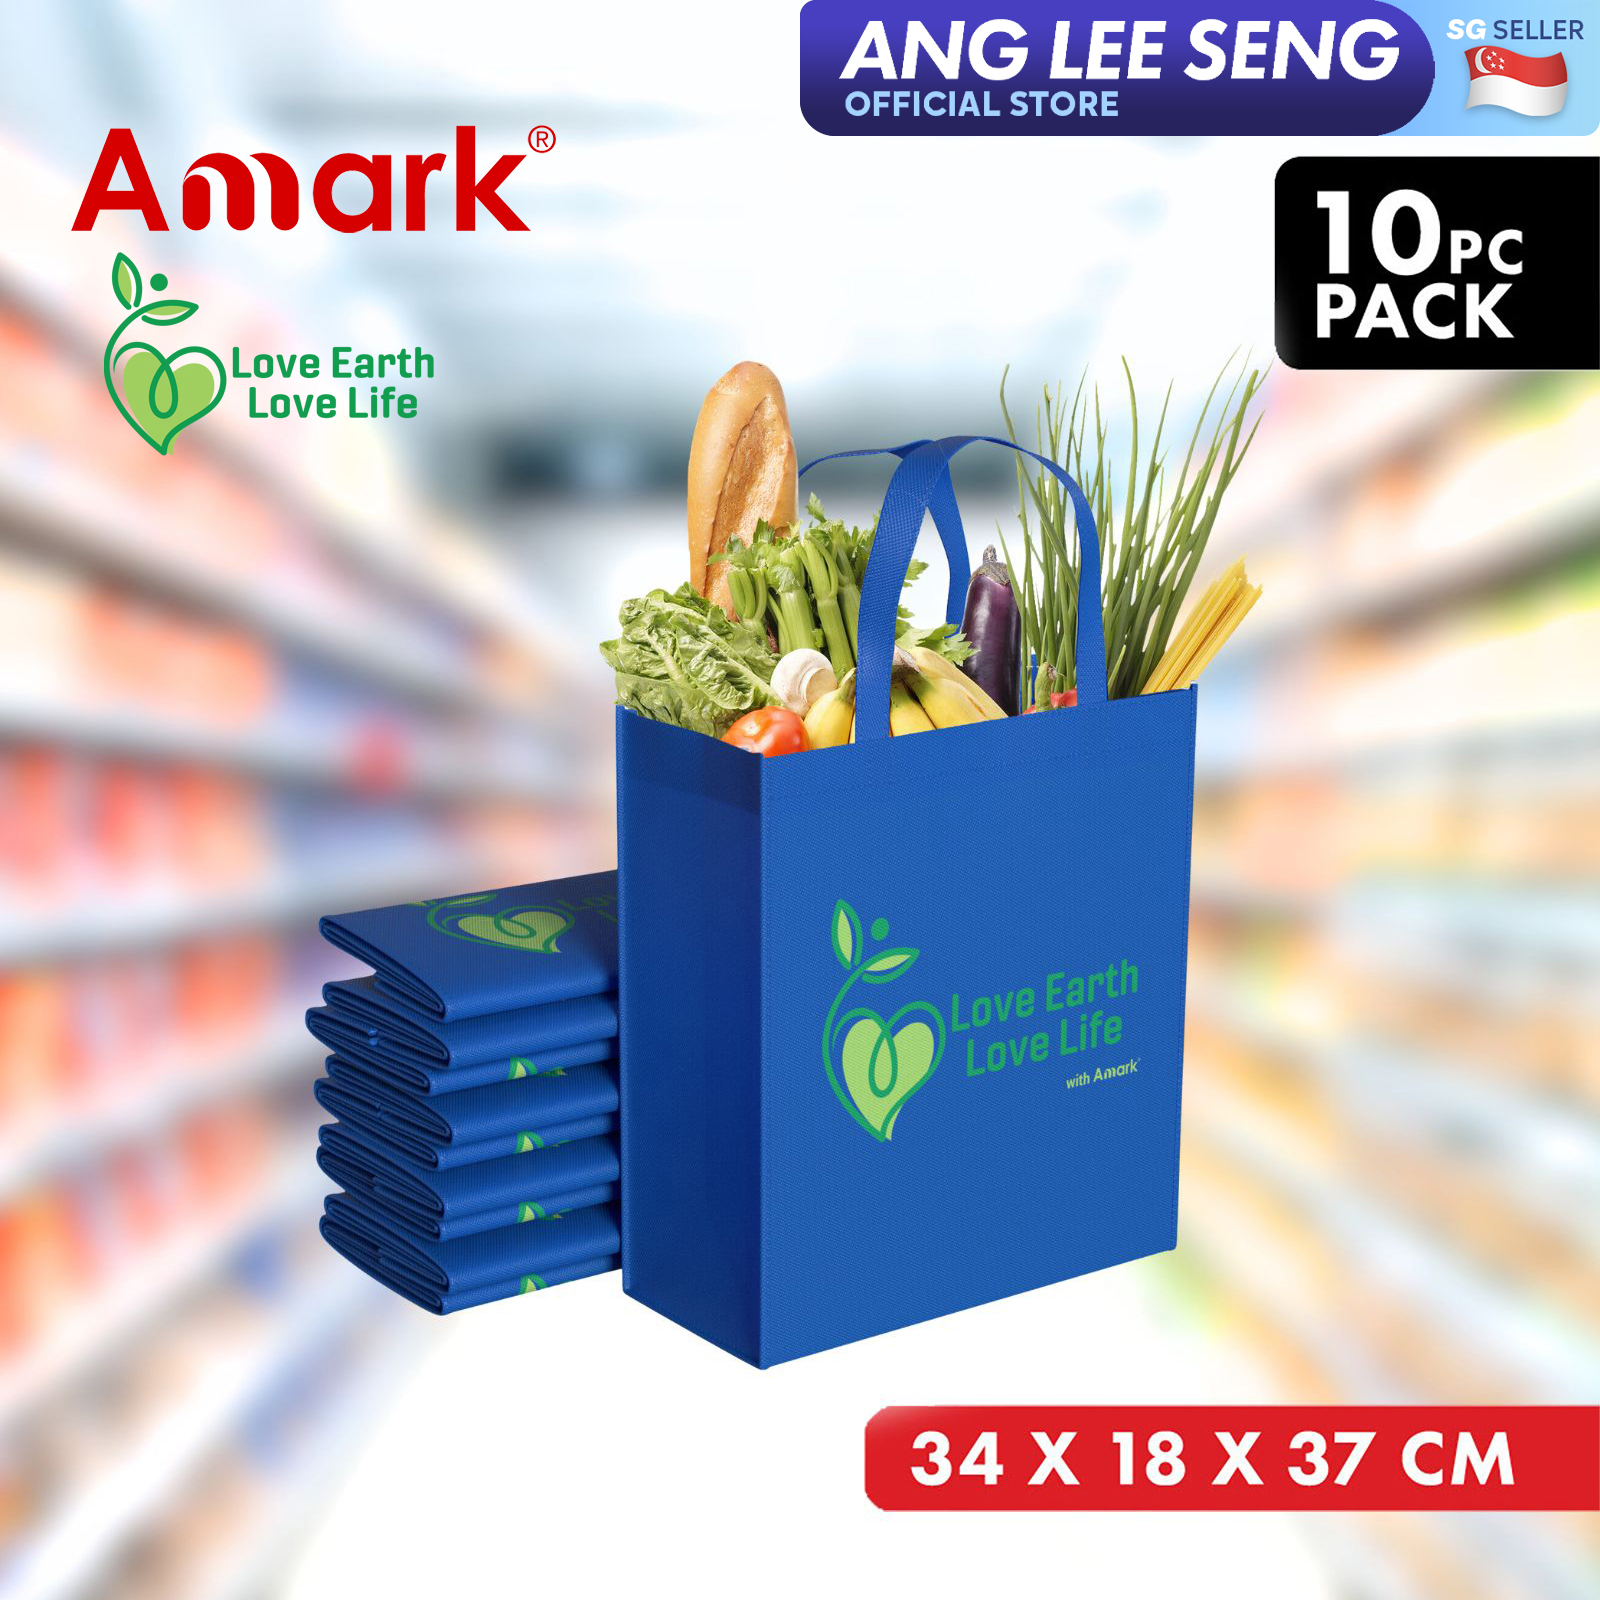 Amark Love Earth Love Life Recyclable Bag 10-pc Pack